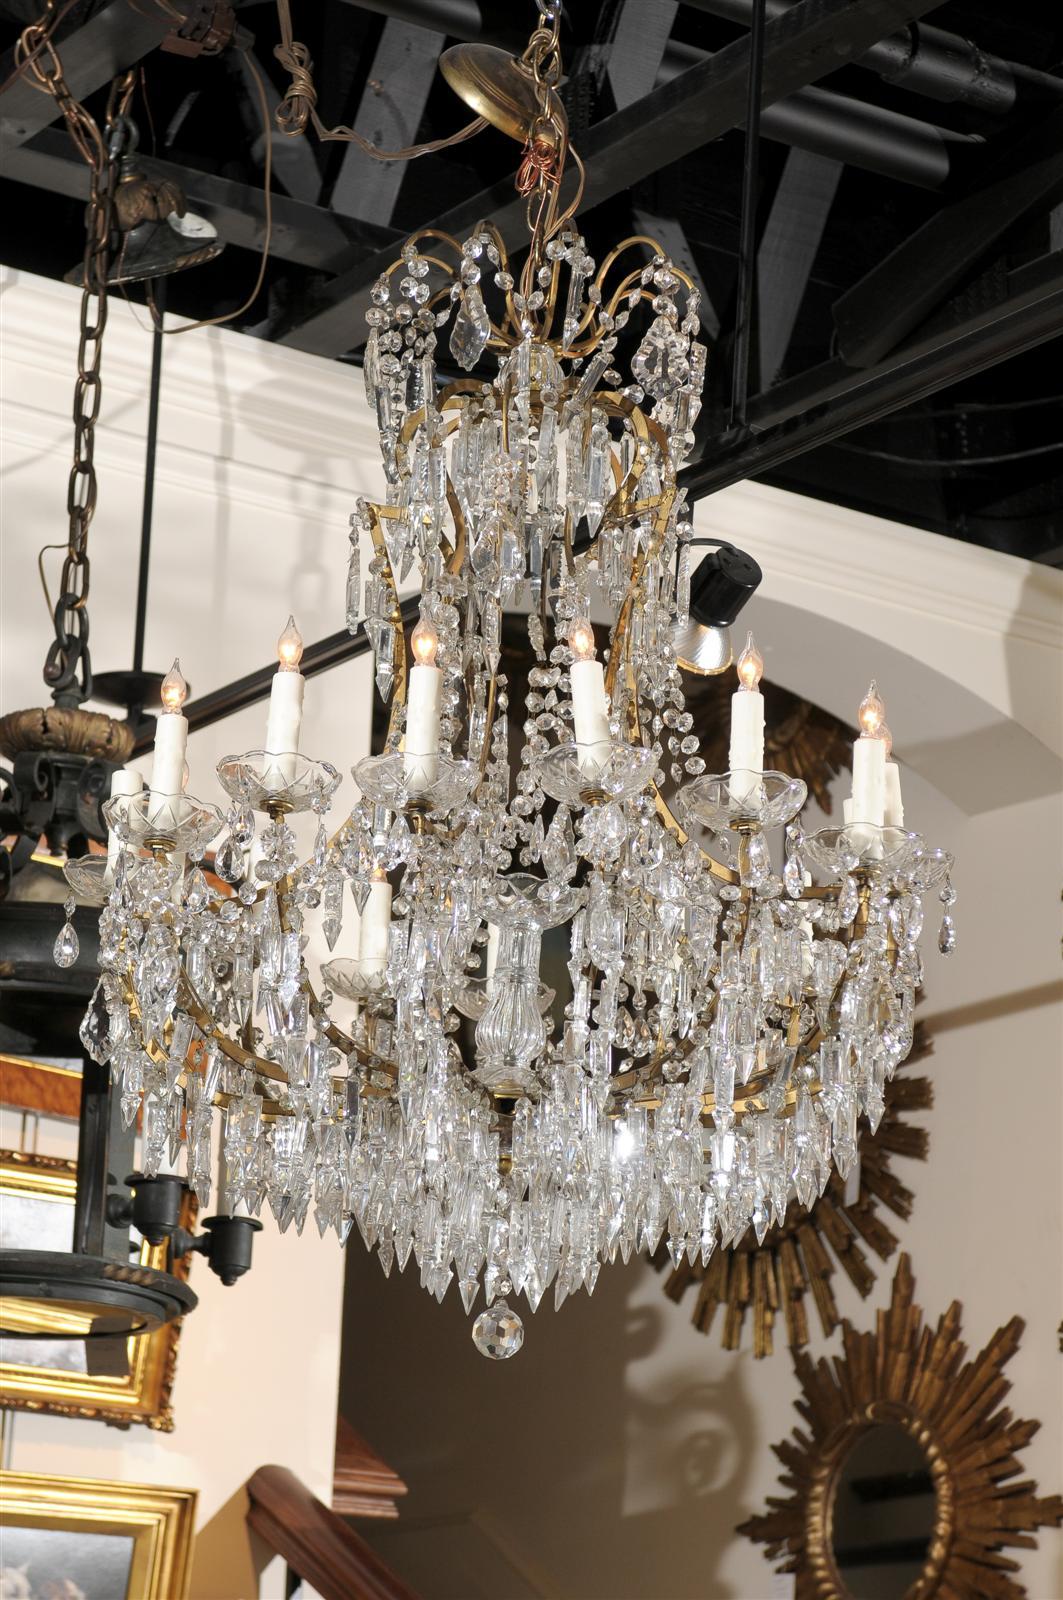 This French Louis XV style fifteen-light crystal chandelier from the early 20th century features a thin gilded metal armature, supporting a variety of crystals. The upper part of the chandelier is decorated with scrolled arms, supporting pendeloques